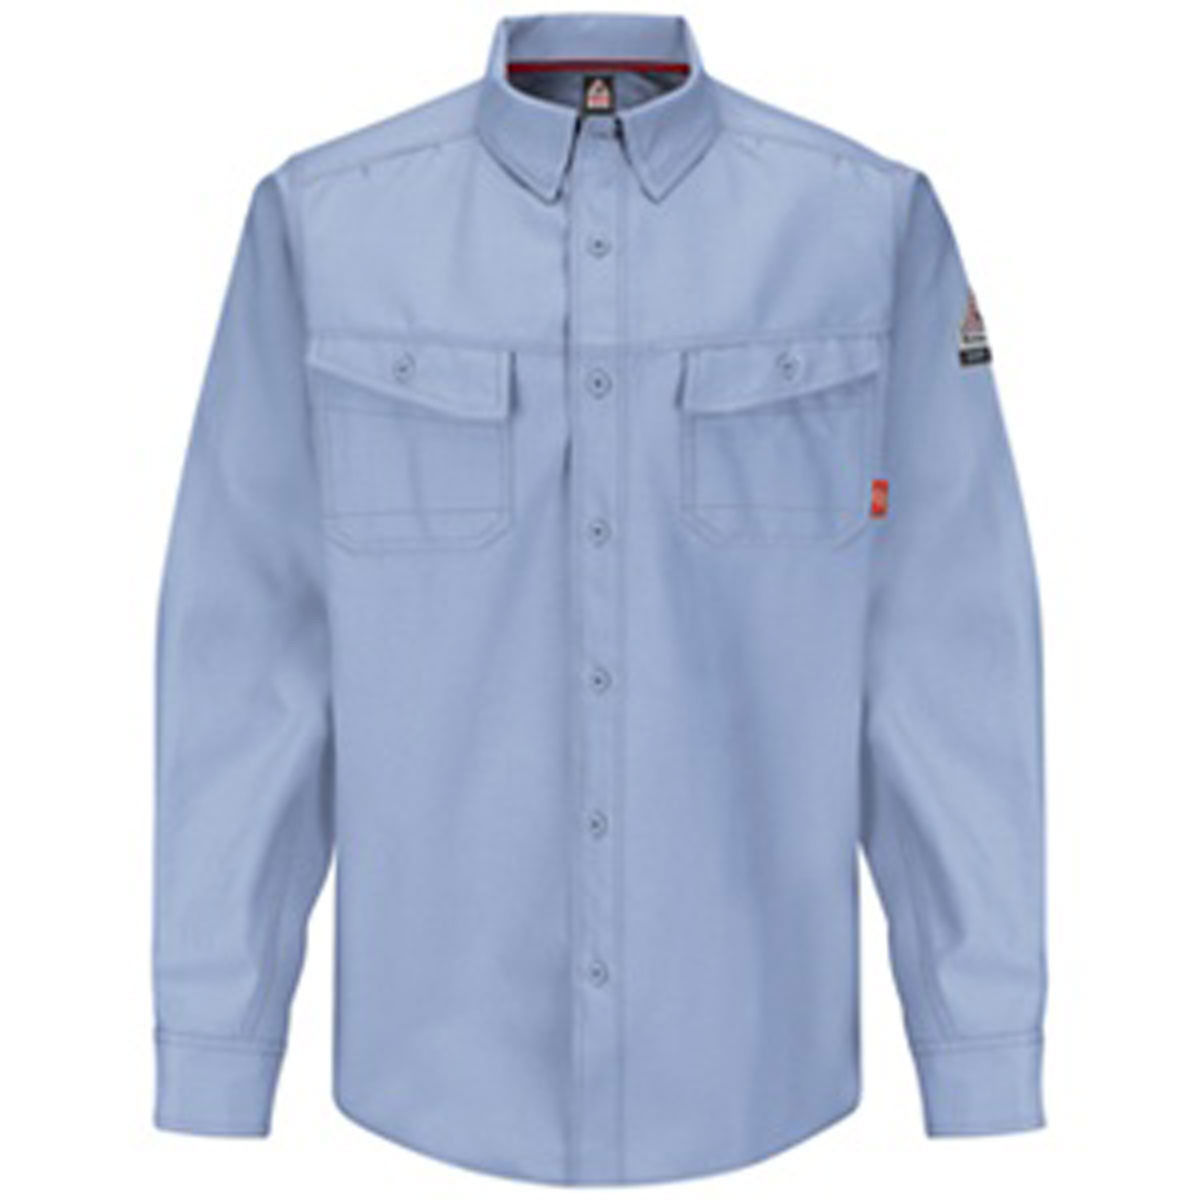 What features are offered by Bulwark FR shirts in the iQ Series QS40LB Men's Work Shirt?